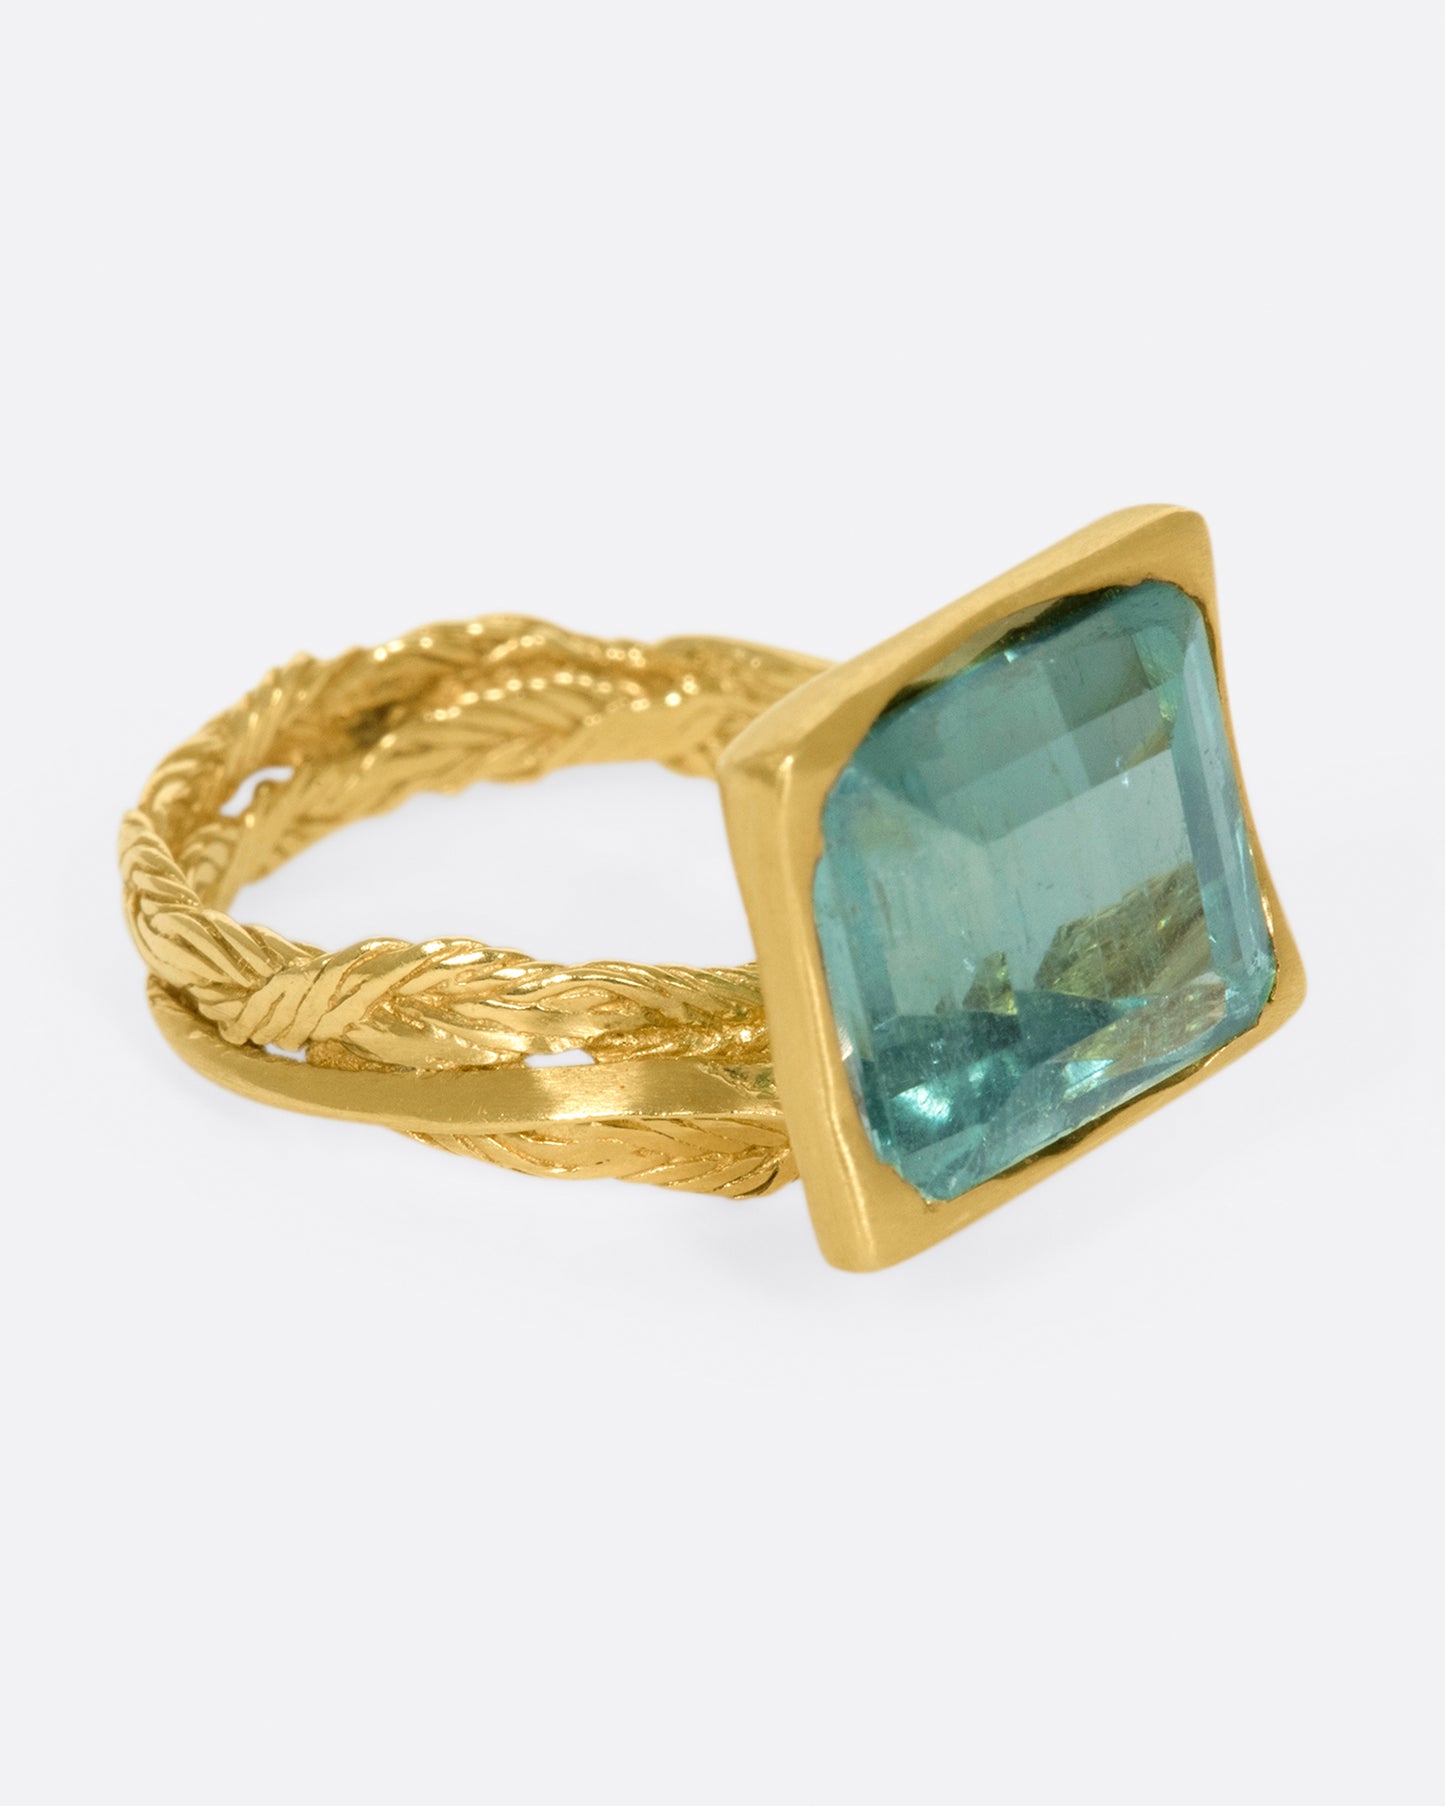 A gold braided band with a pale green square tourmaline.